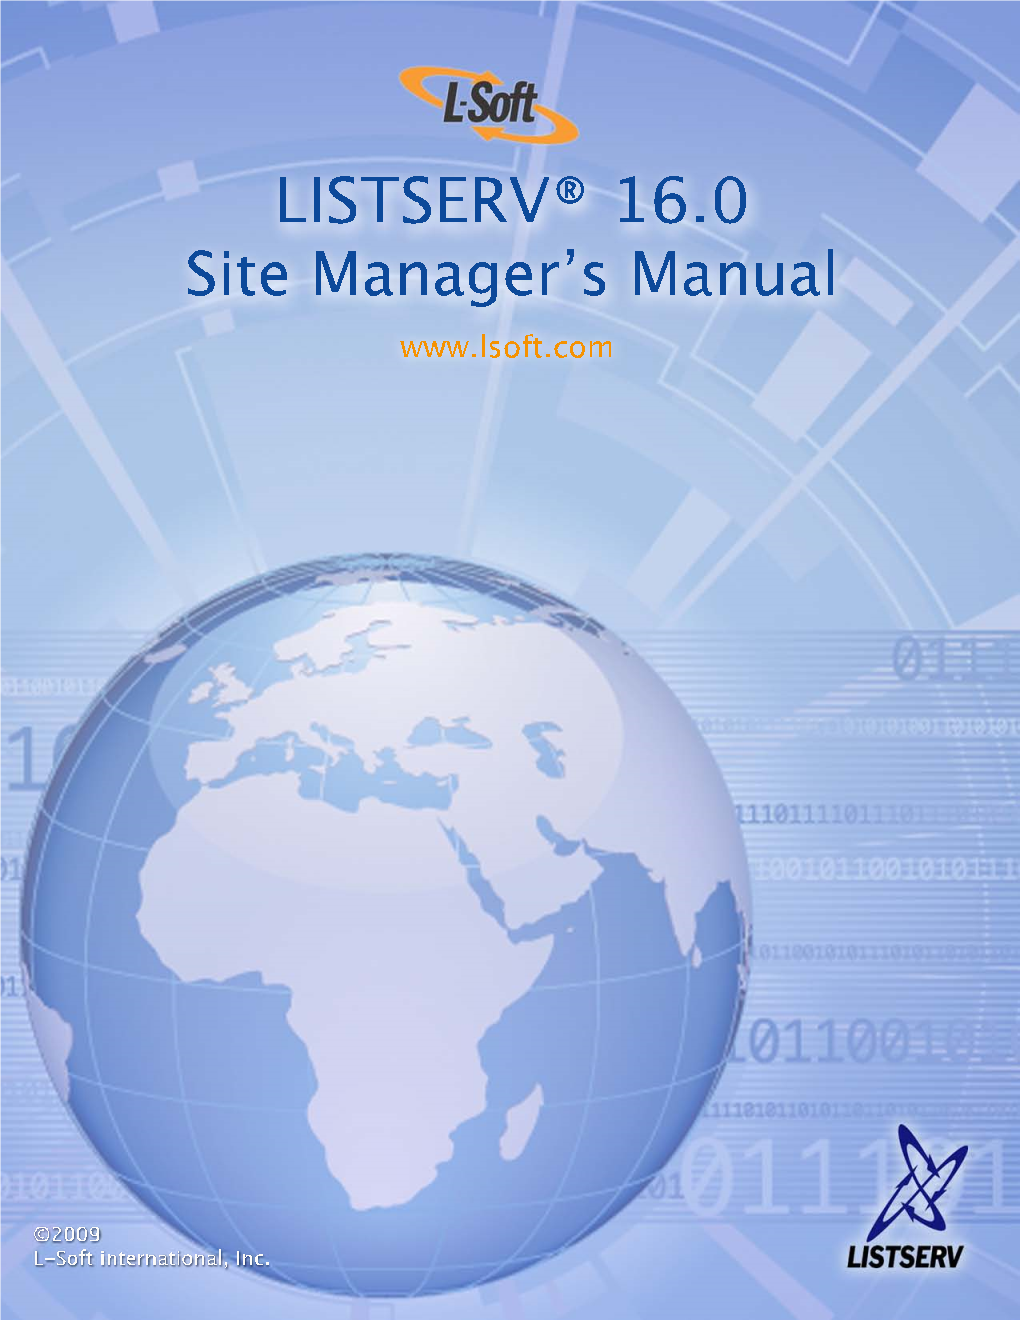 LISTSERV 16.0 Site Manager's Operations Manual